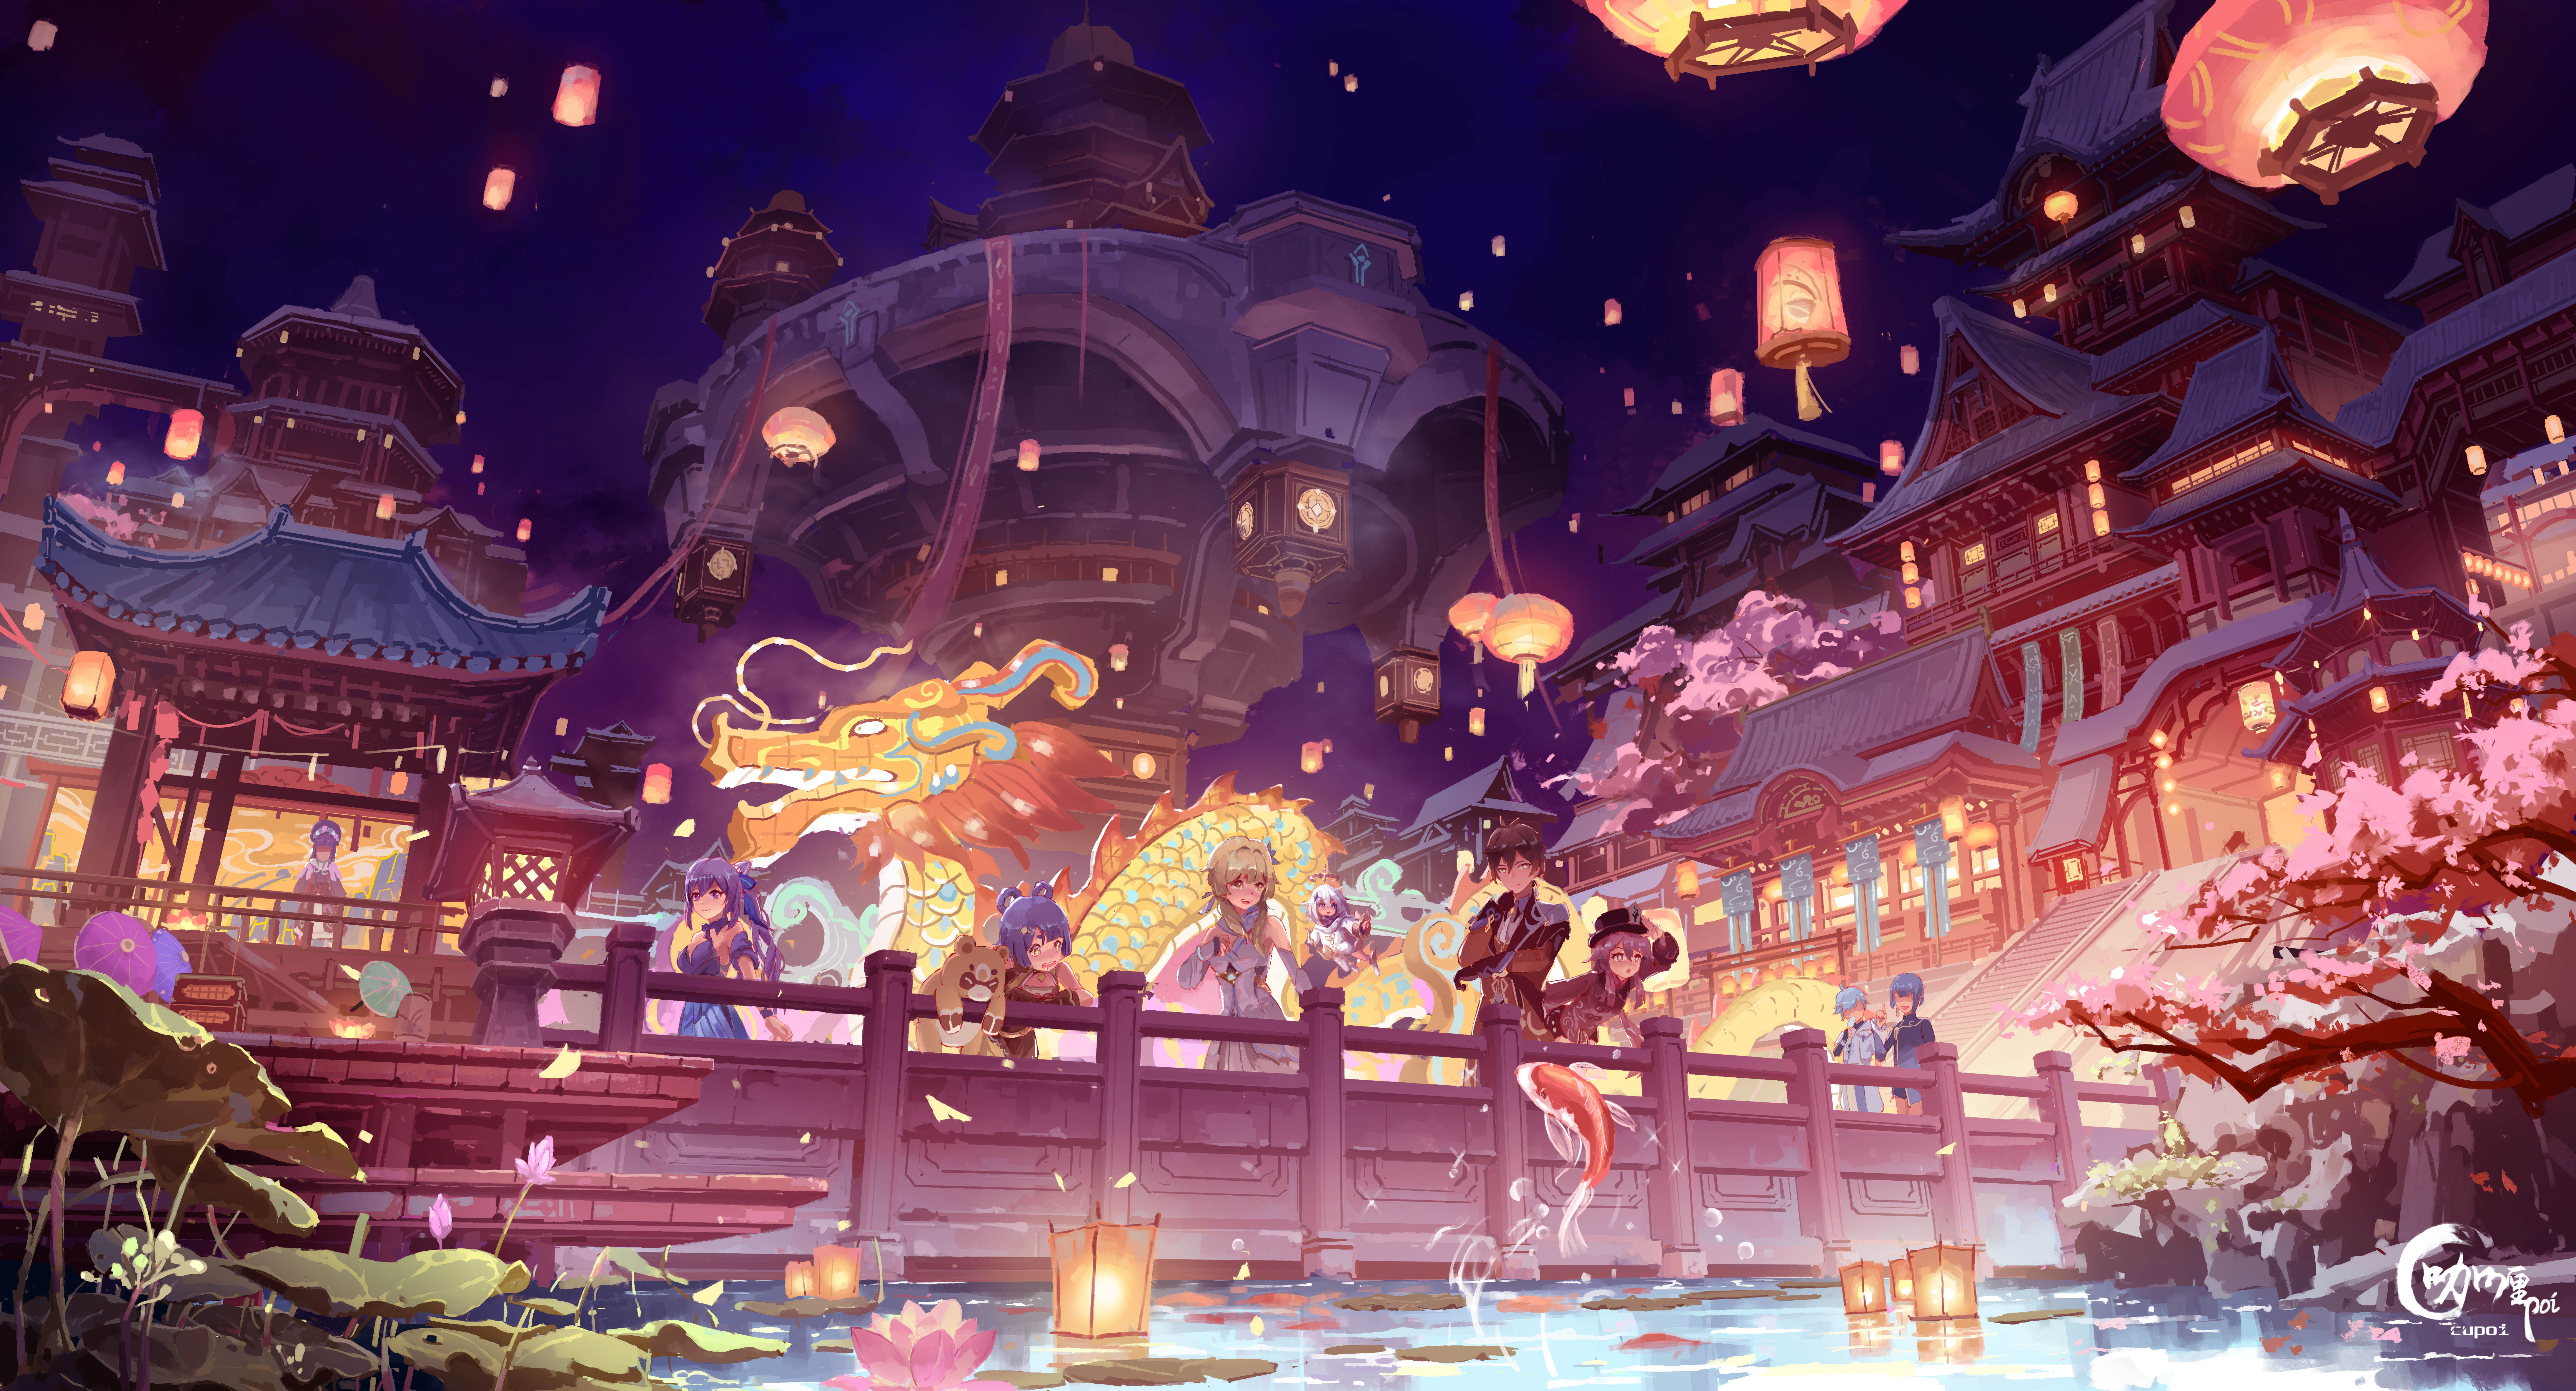 Anime 8756x4728 Genshin Impact night sky anime girls anime boys night group of people sky city water sky lanterns building Asian architecture plants animals fish koi trees cherry blossom water lilies flowers city lights lantern koi fish water drops lights chinese clothing Chigalidepoi outdoors Lumine (Genshin Impact) Paimon (Genshin Impact) Yun Jin (Genshin Impact) Keqing (Genshin Impact) Xiangling (Genshin Impact) Guoba (Genshin Impact) Zhongli (Genshin Impact) Hu Tao (Genshin Impact) Chongyun(Genshin Impact) Xingqiu (Genshin Impact)